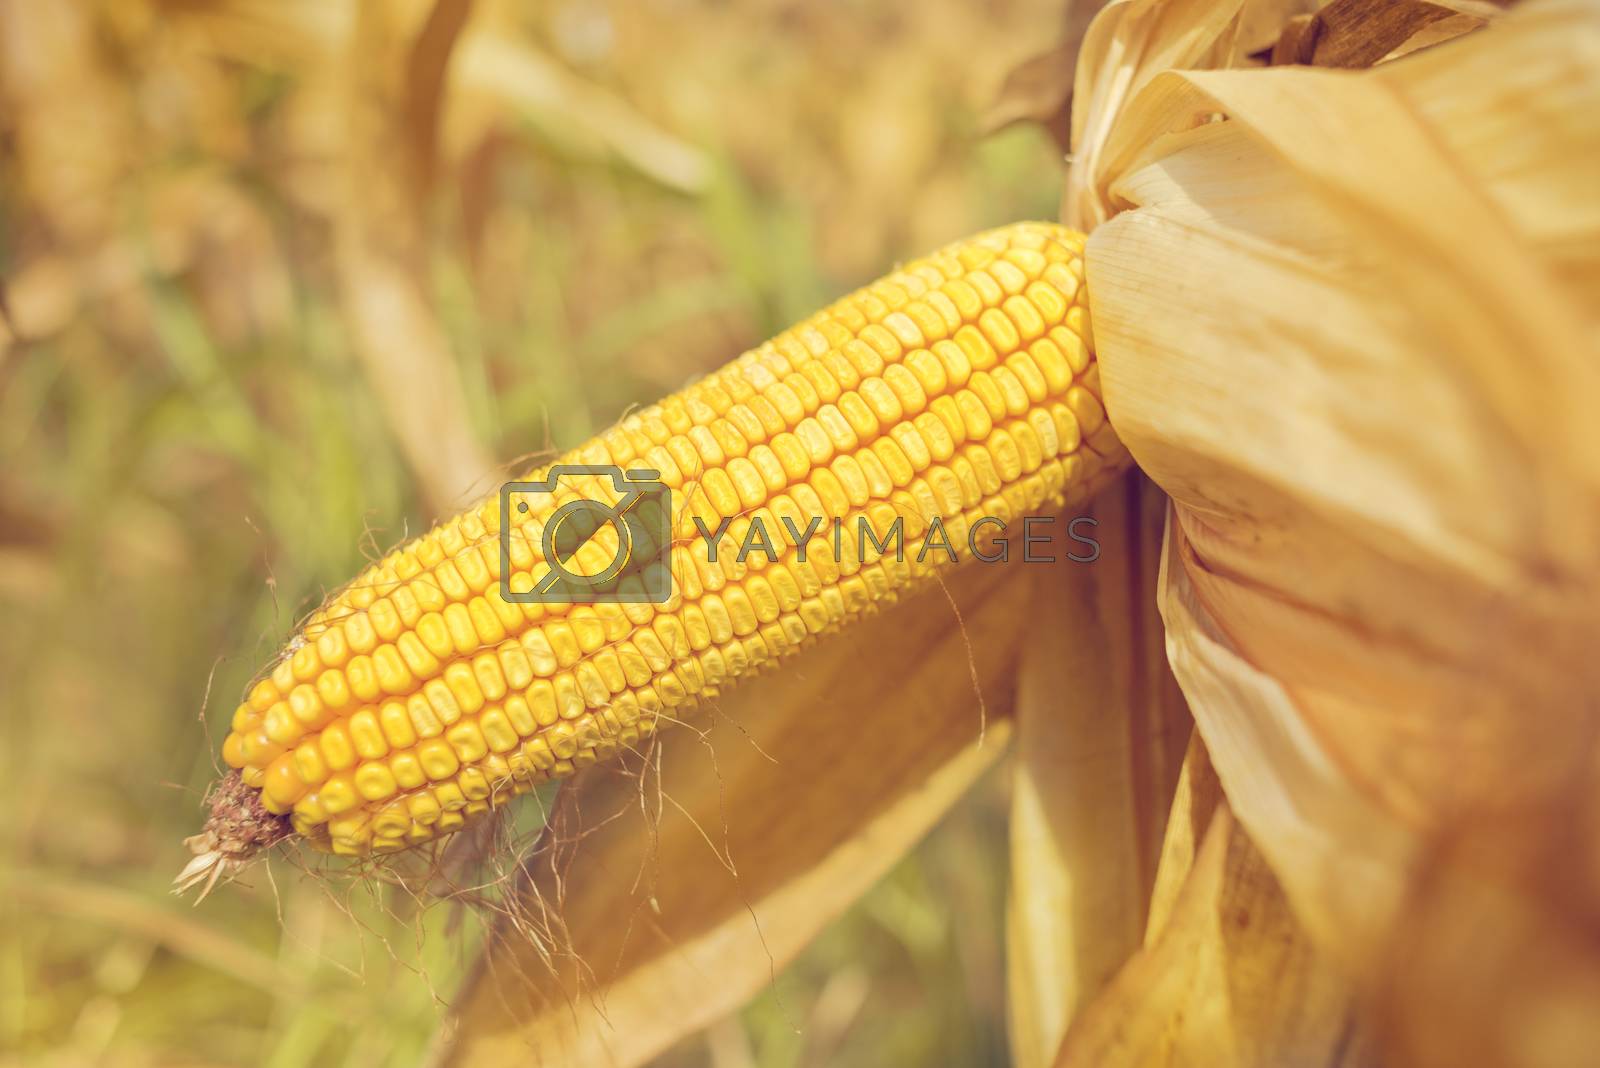 Royalty free image of Ripe maize corn on the cob by stevanovicigor